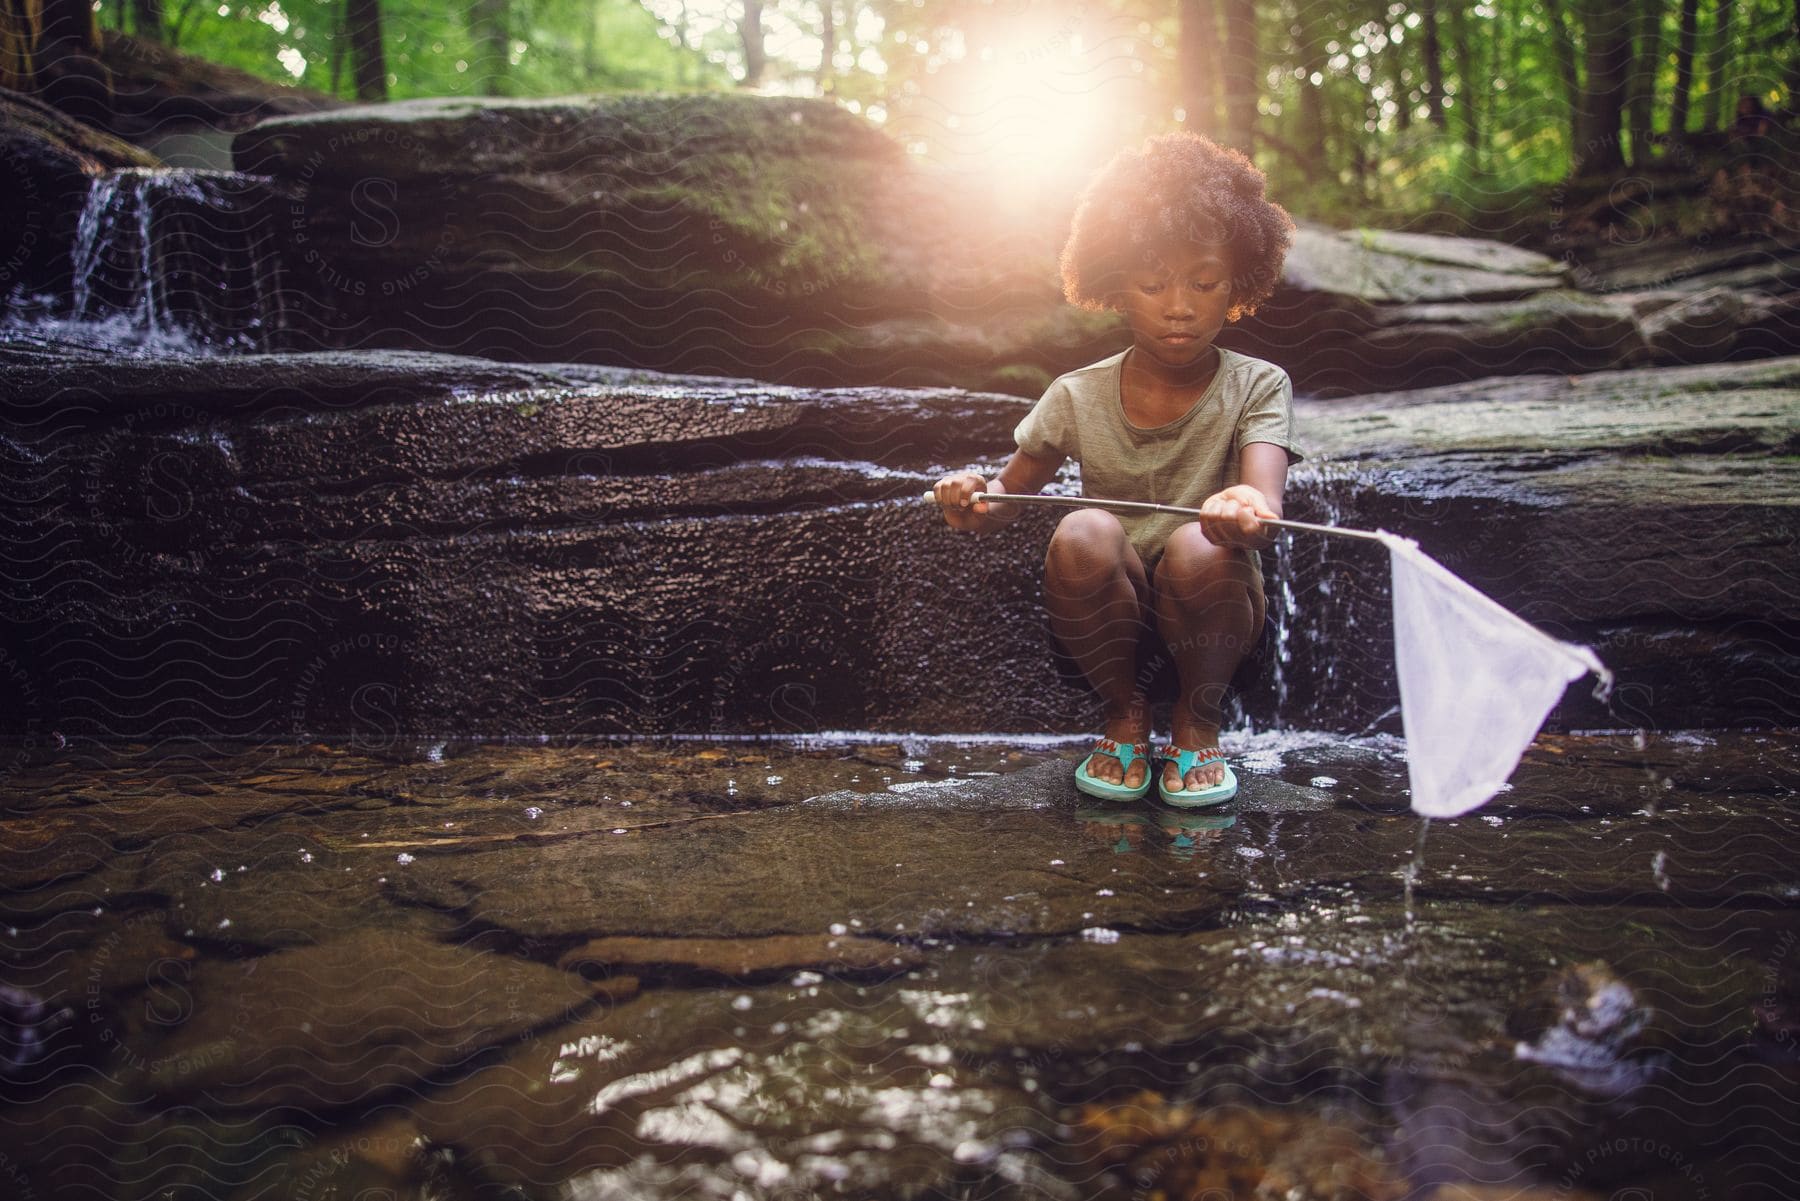 A young girl kneeling in a stream in nature holding a fish net in her hands over the water